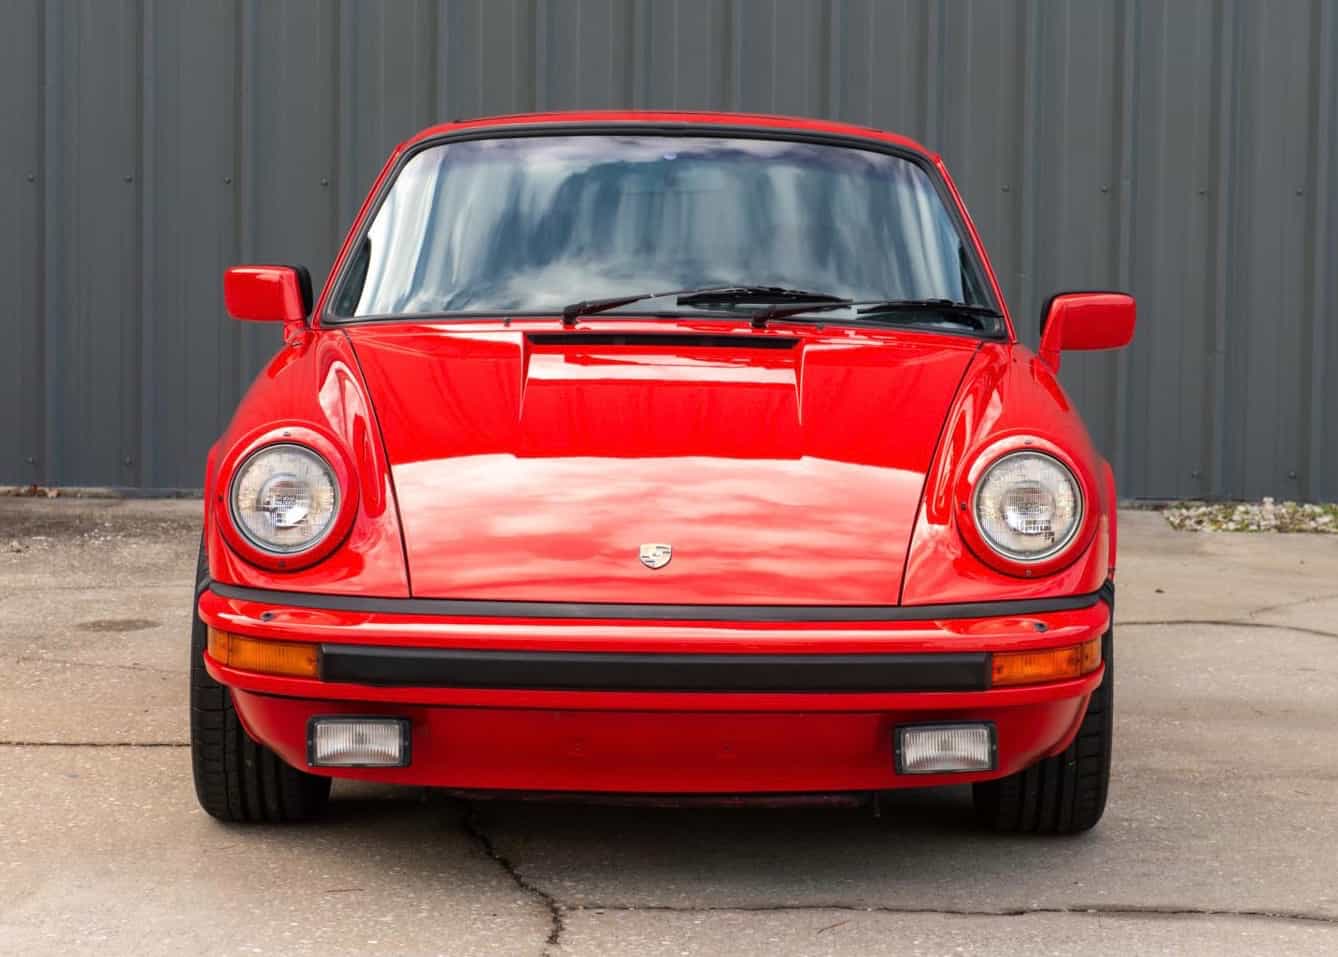 1983 Porsche 911SC, Pick of the Day: 1983 Porsche 911SC comes with complete owner history, ClassicCars.com Journal